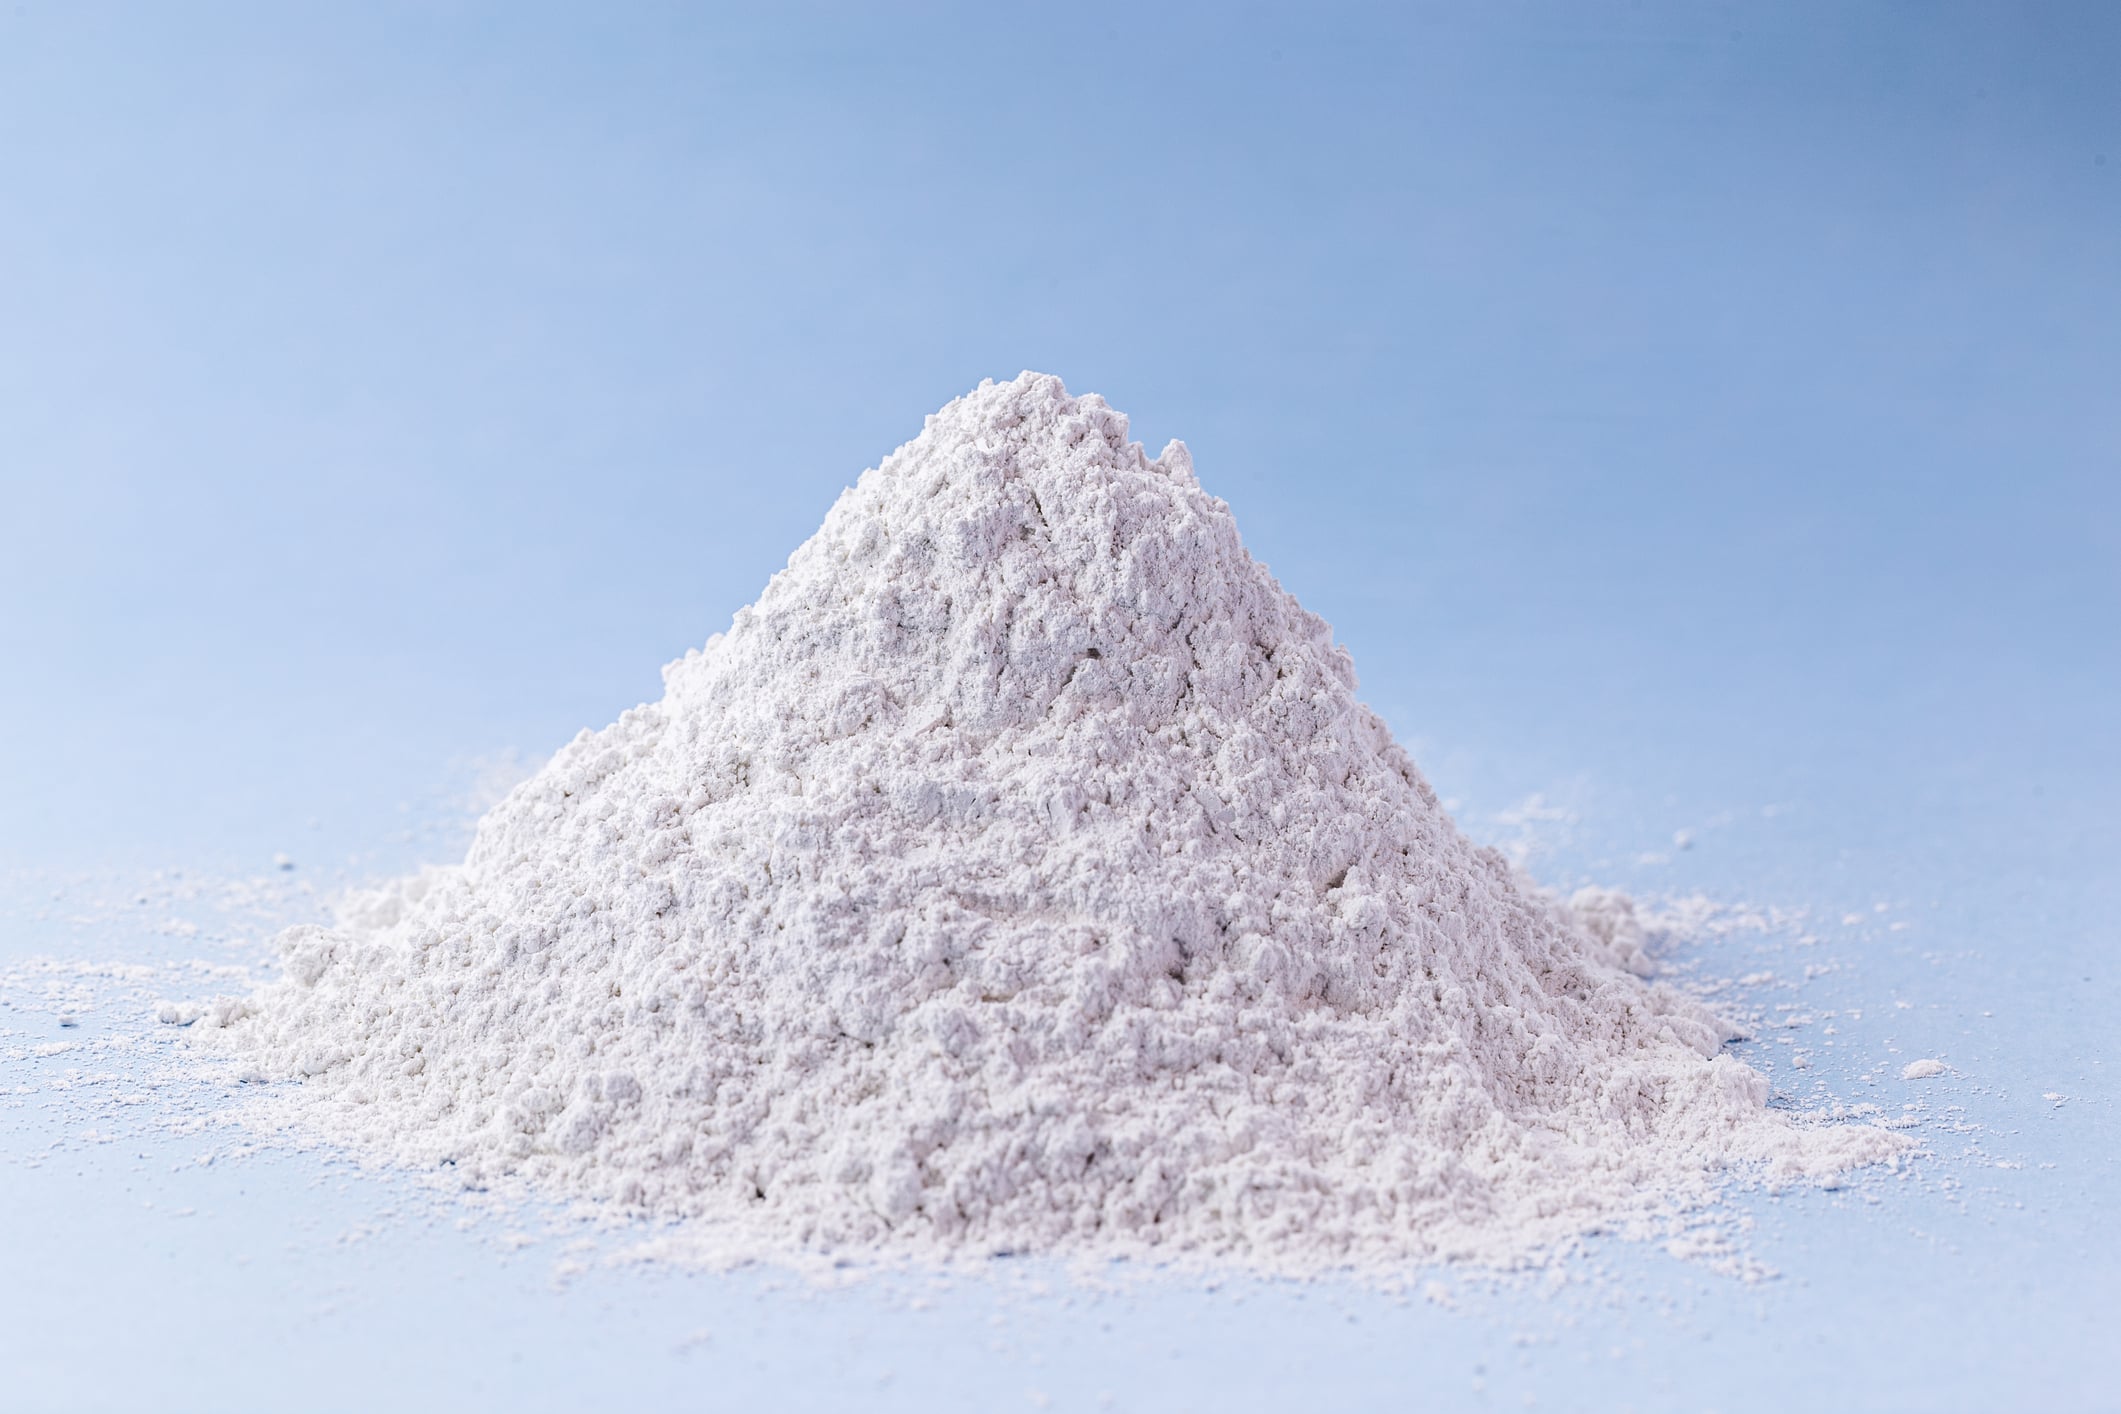 Inorganic Compounds - zinc oxide, white powder used as a fungus growth inhibitor